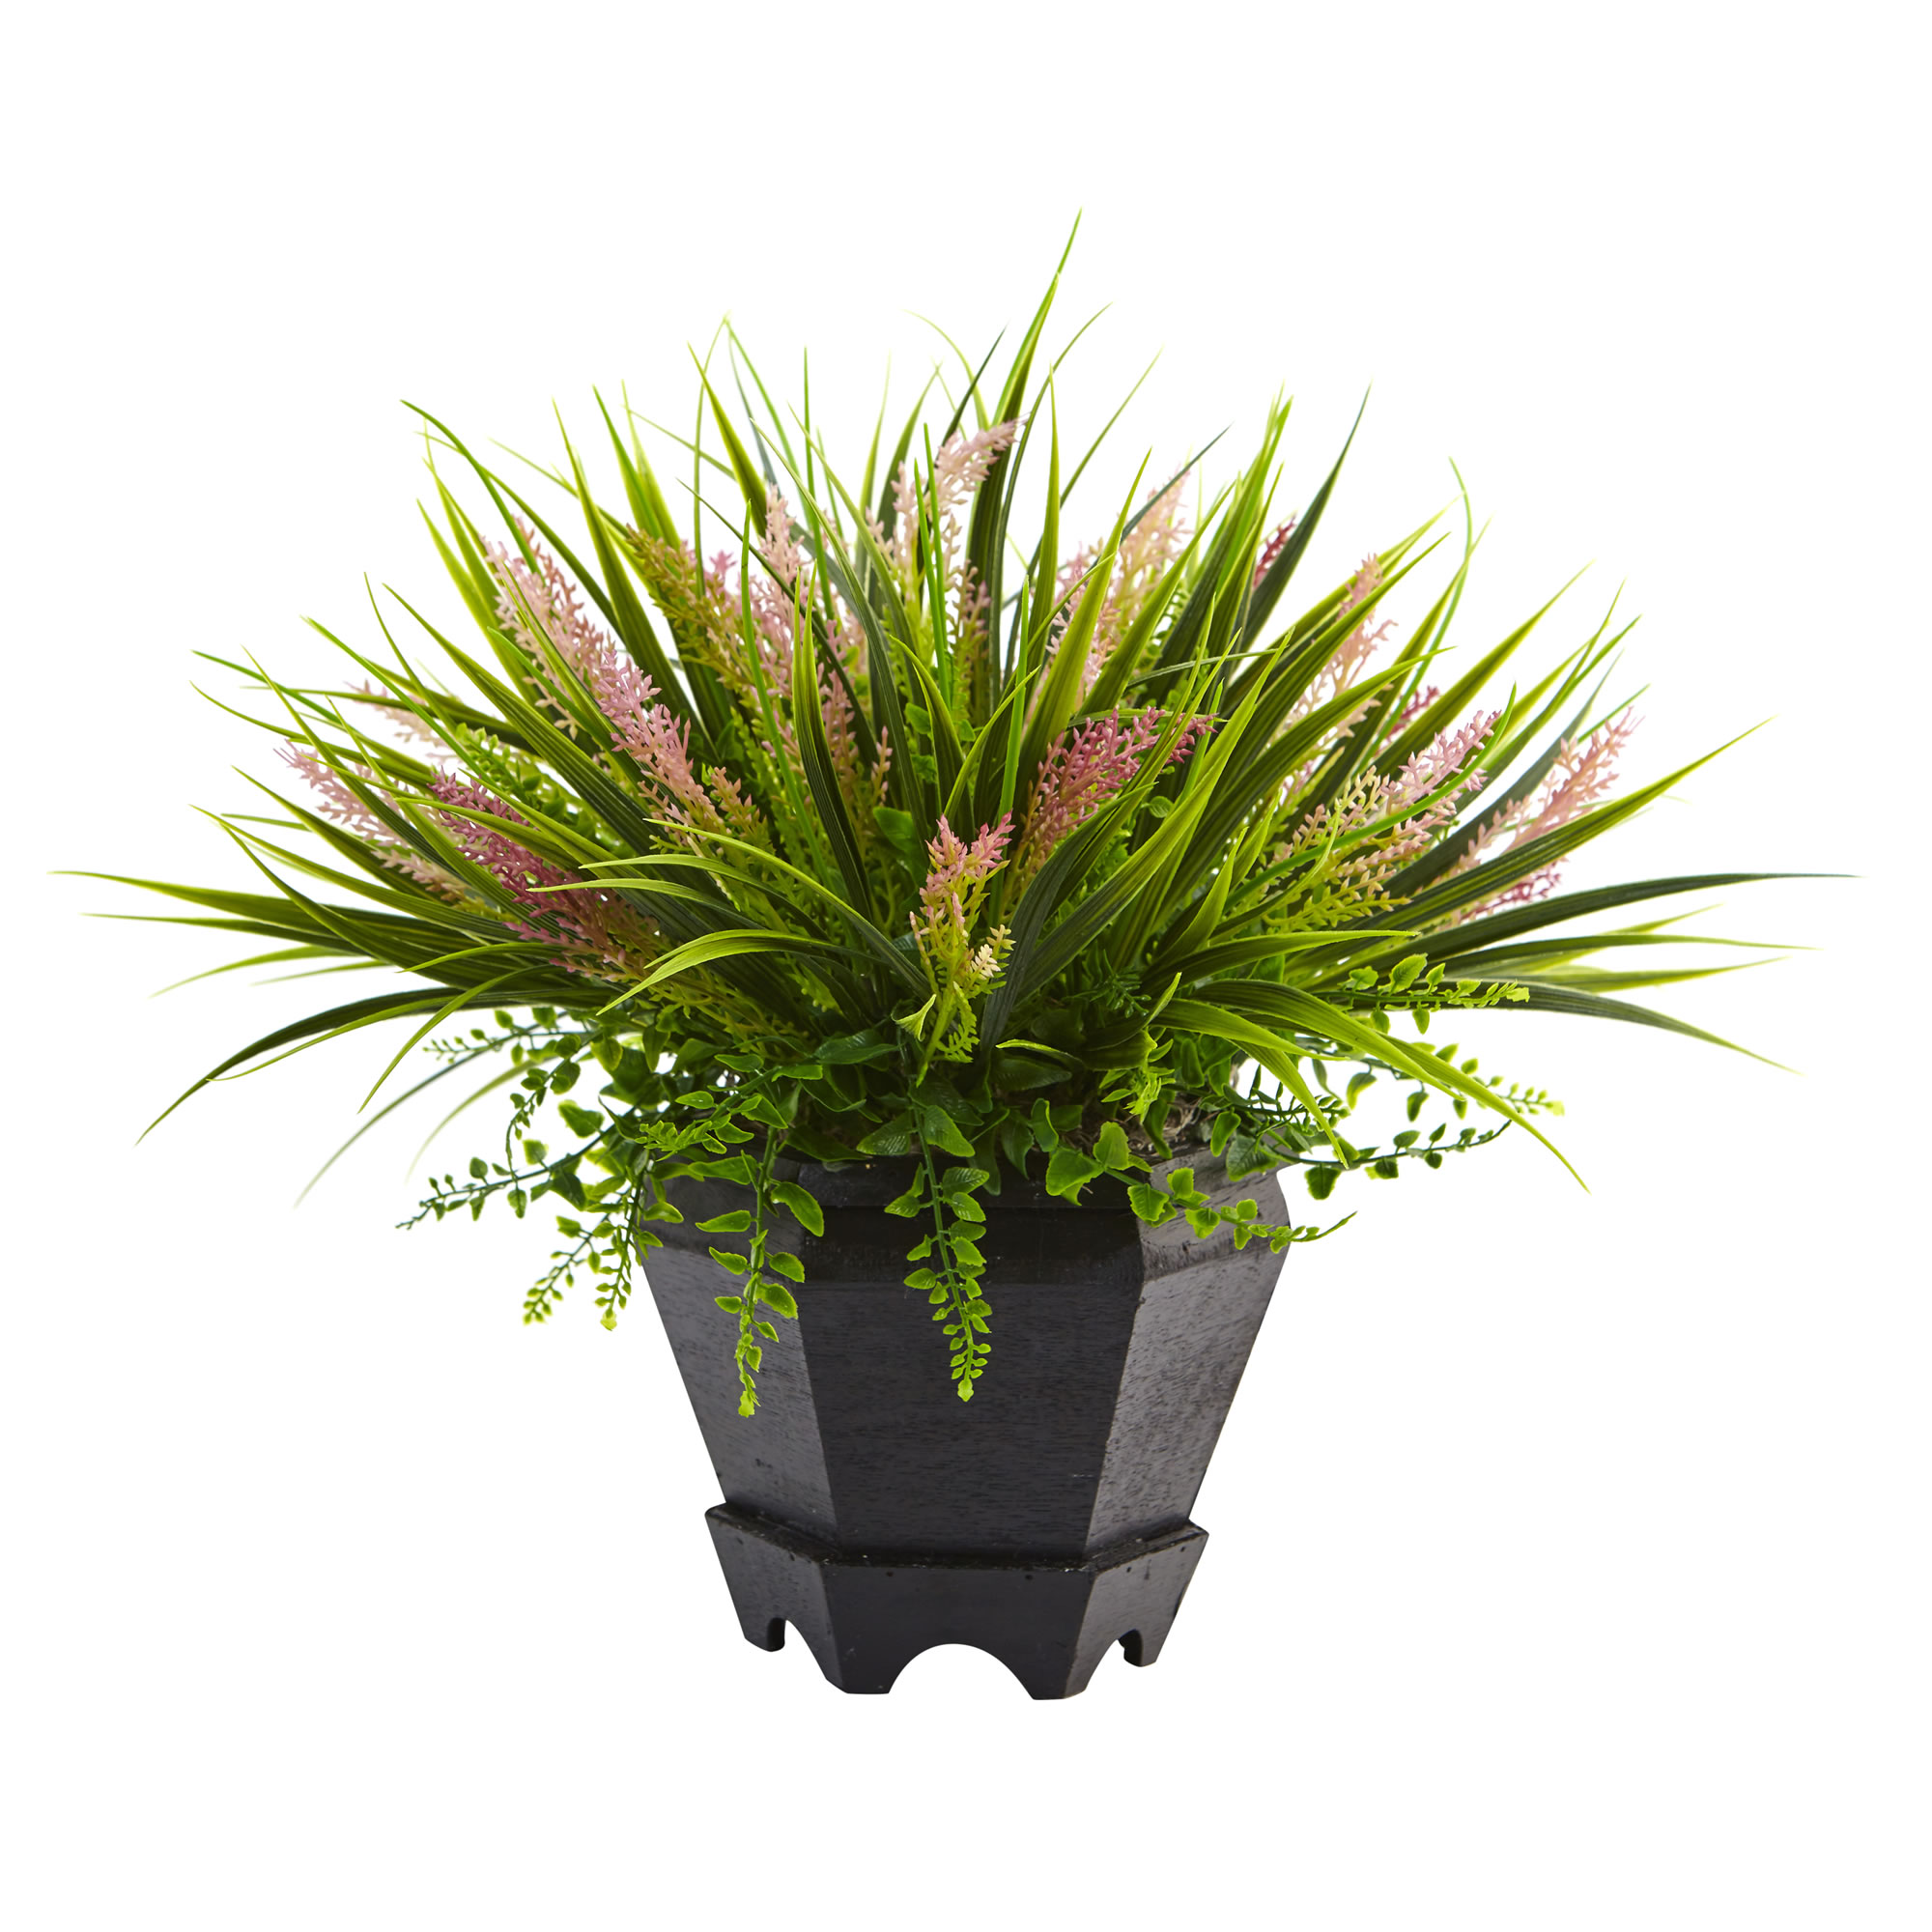 15 Inch Mixed Grass In Decorative Planter